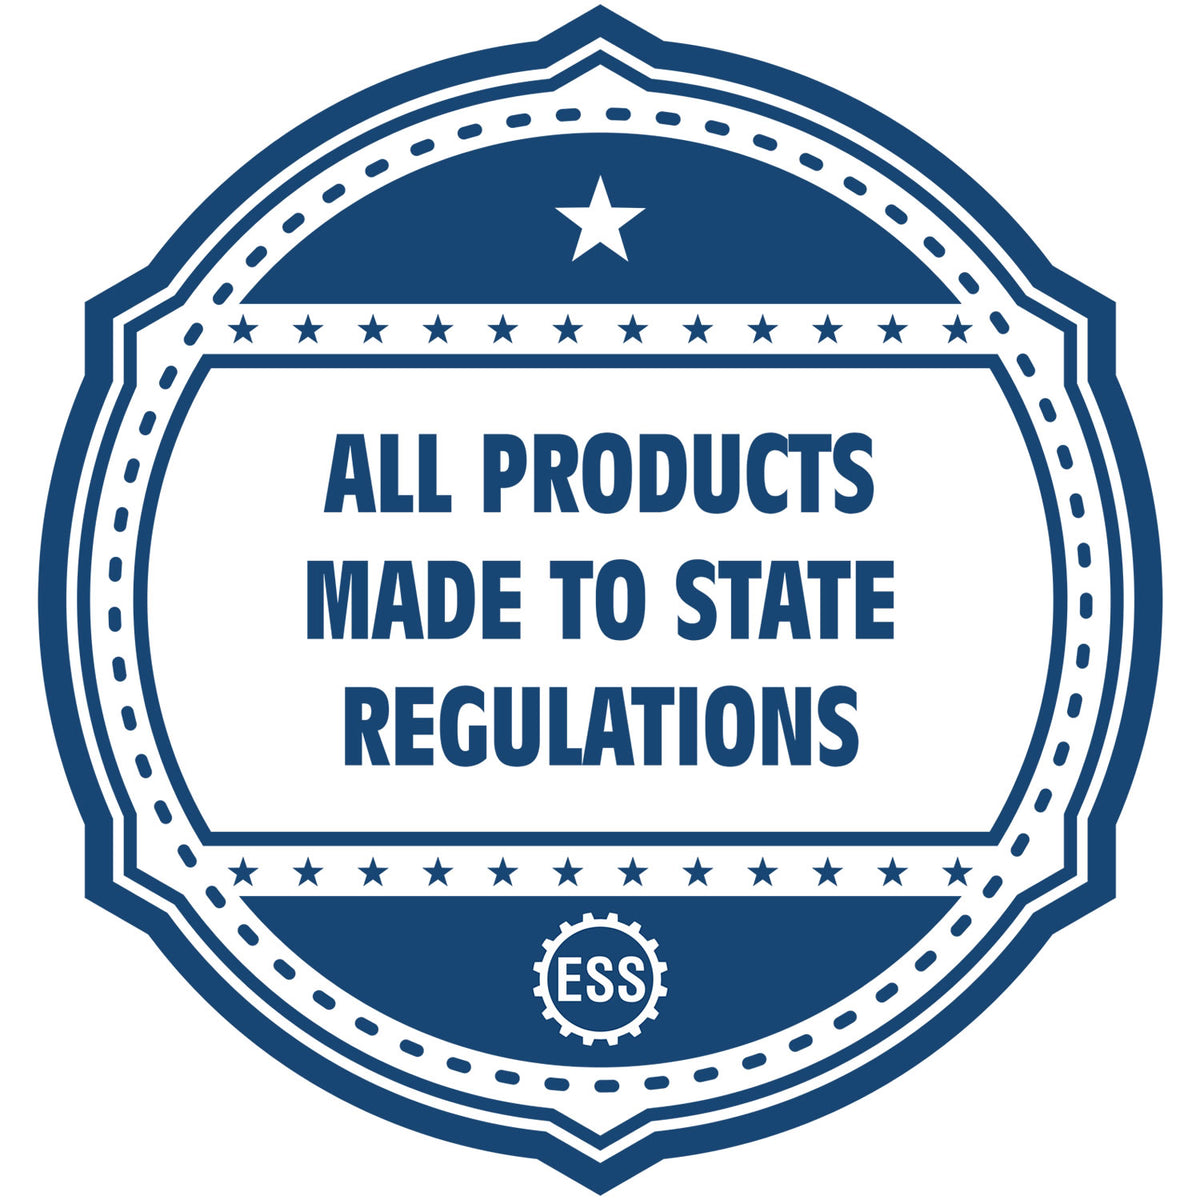 An icon or badge element for the Maryland Professional Engineer Seal Stamp showing that this product is made in compliance with state regulations.